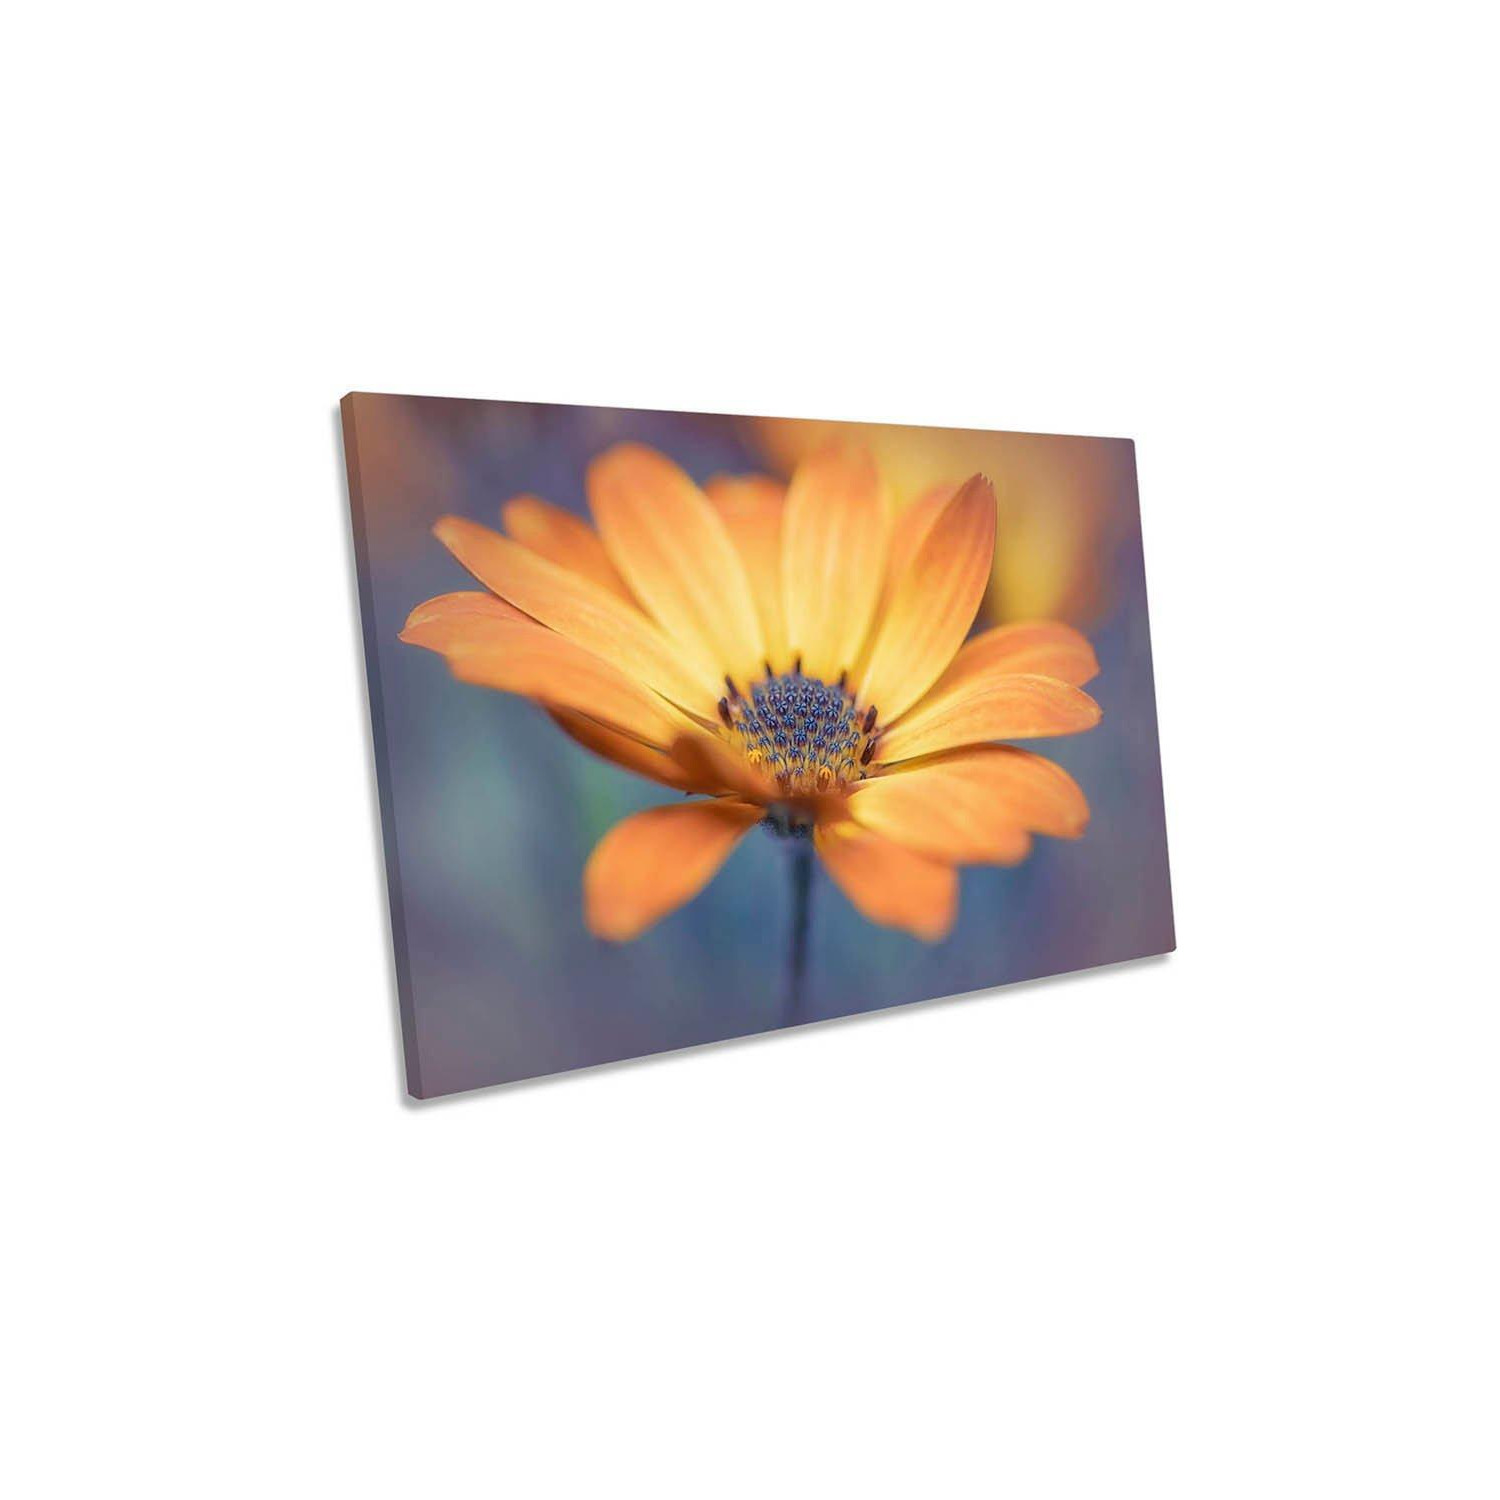 Orange Delight Daisy Flower Floral Canvas Wall Art Picture Print - image 1